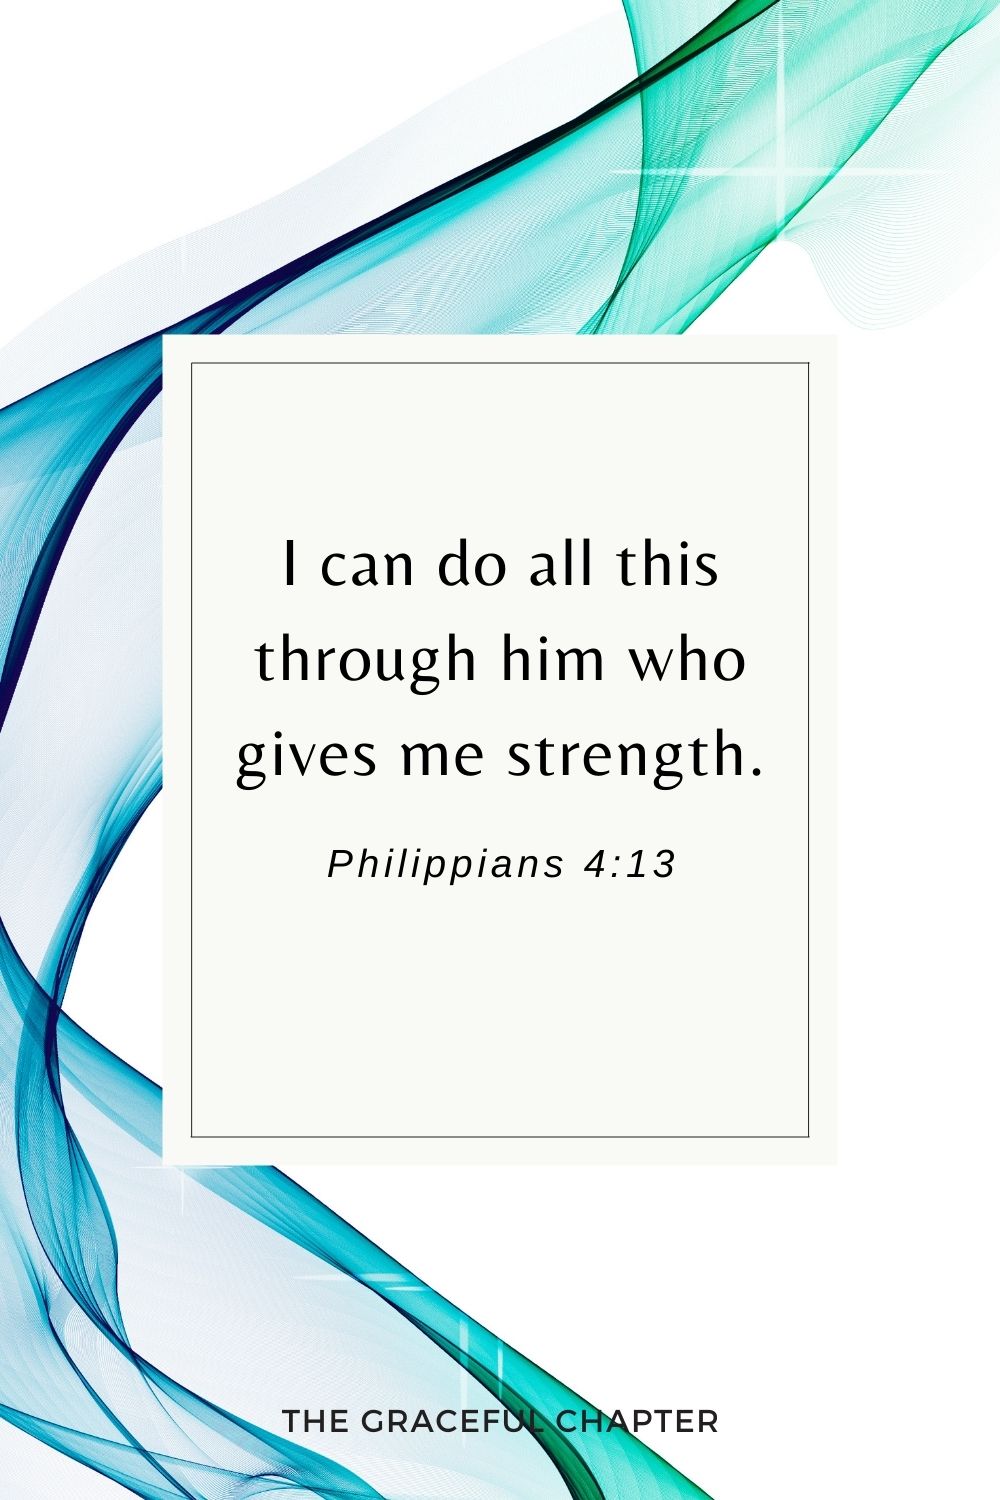  I can do all this through him who gives me strength. Philippians 4:13